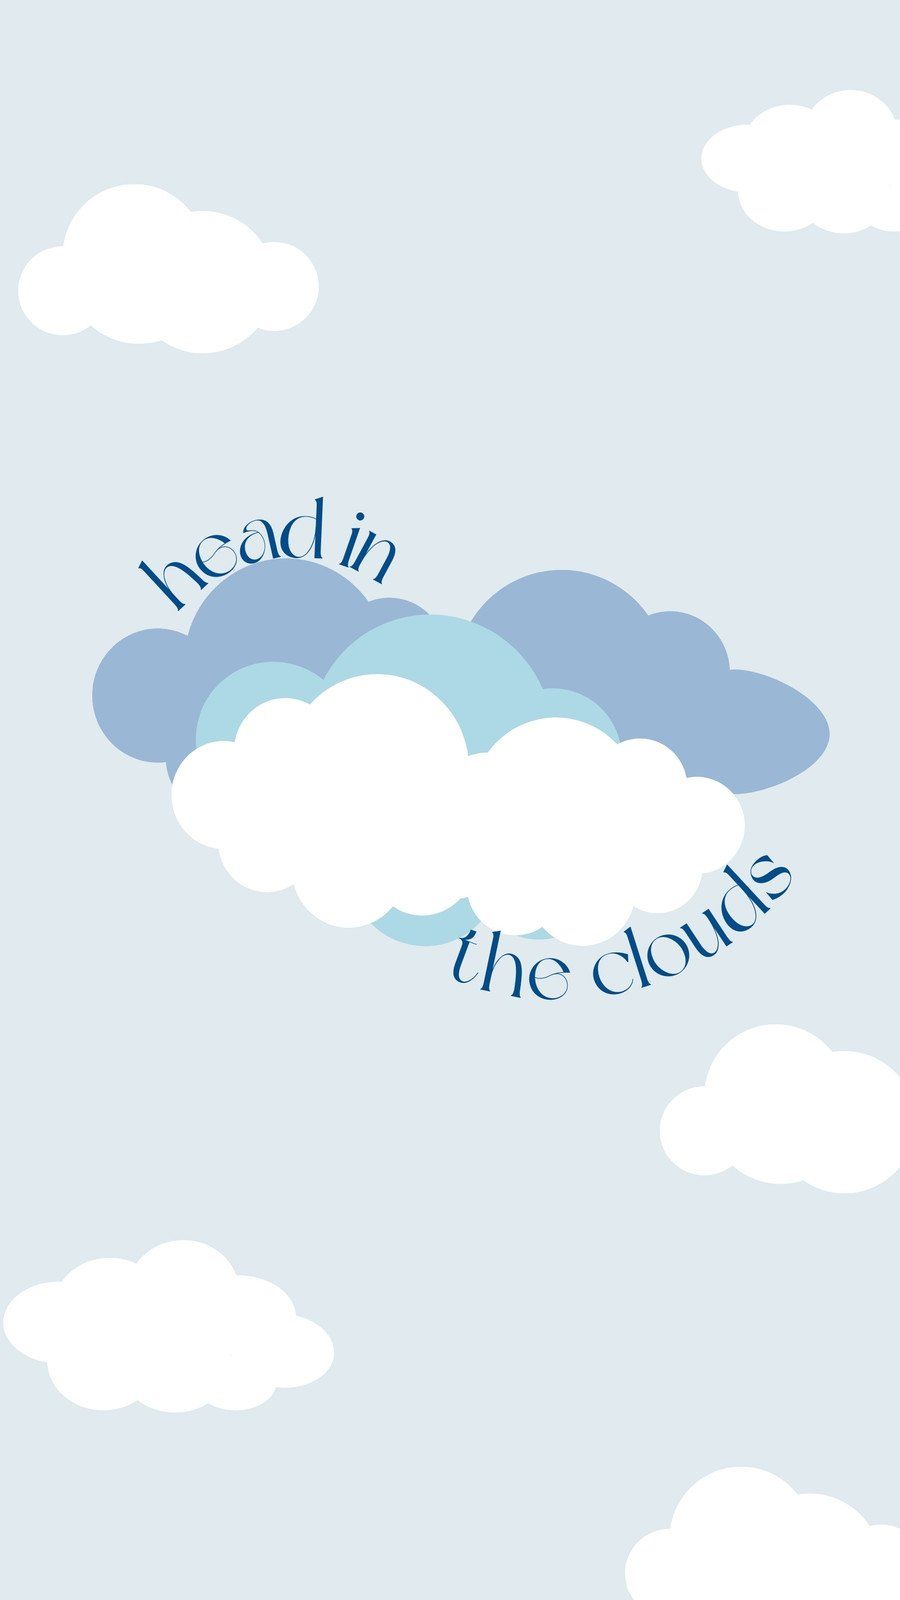 A blue and white cloud with the words head in - Cloud